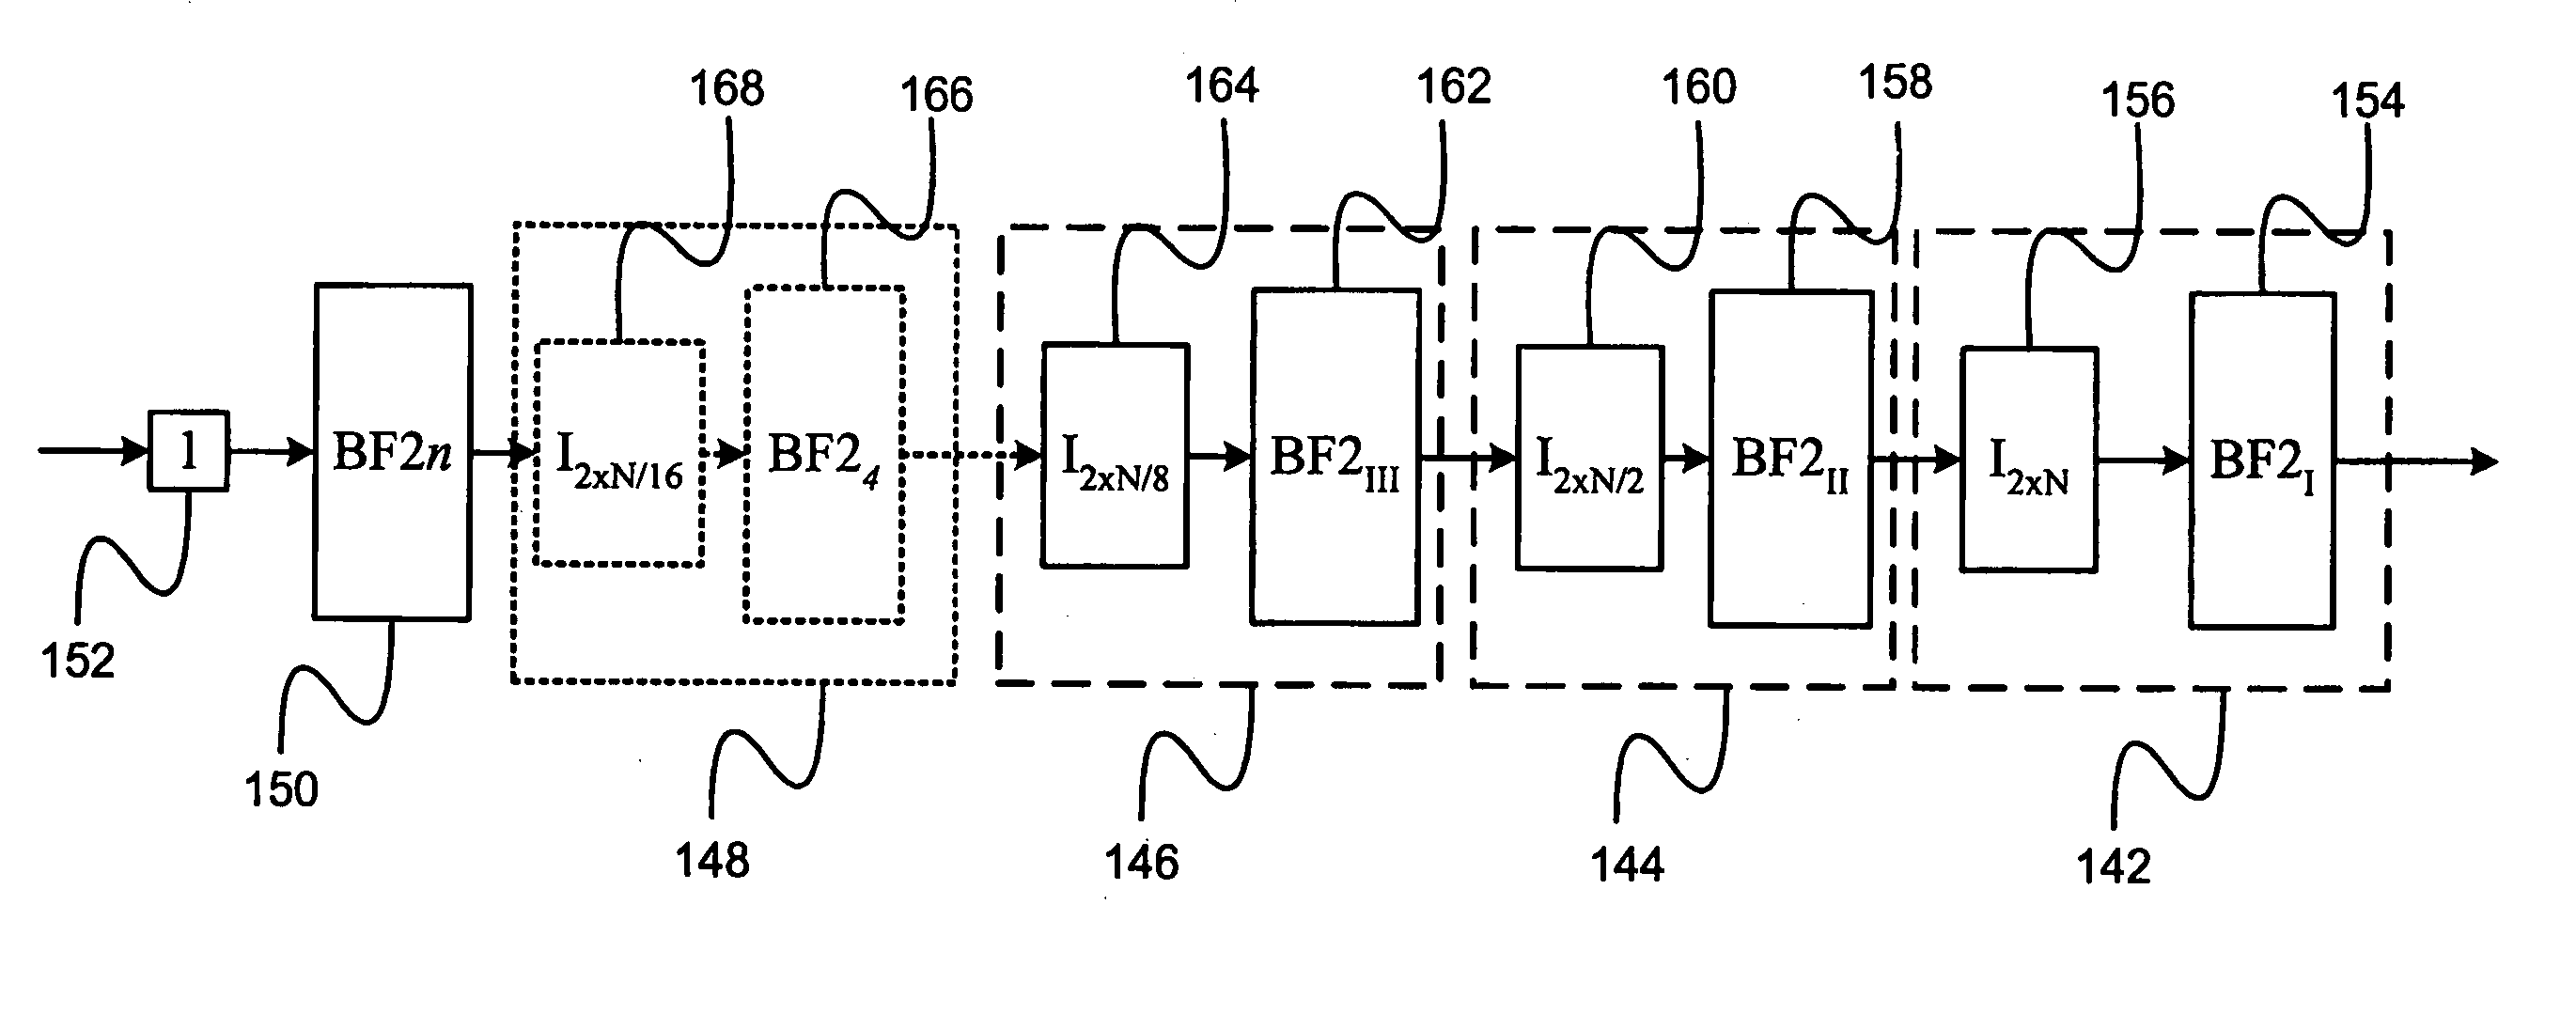 Pipelined FFT processor with memory address interleaving